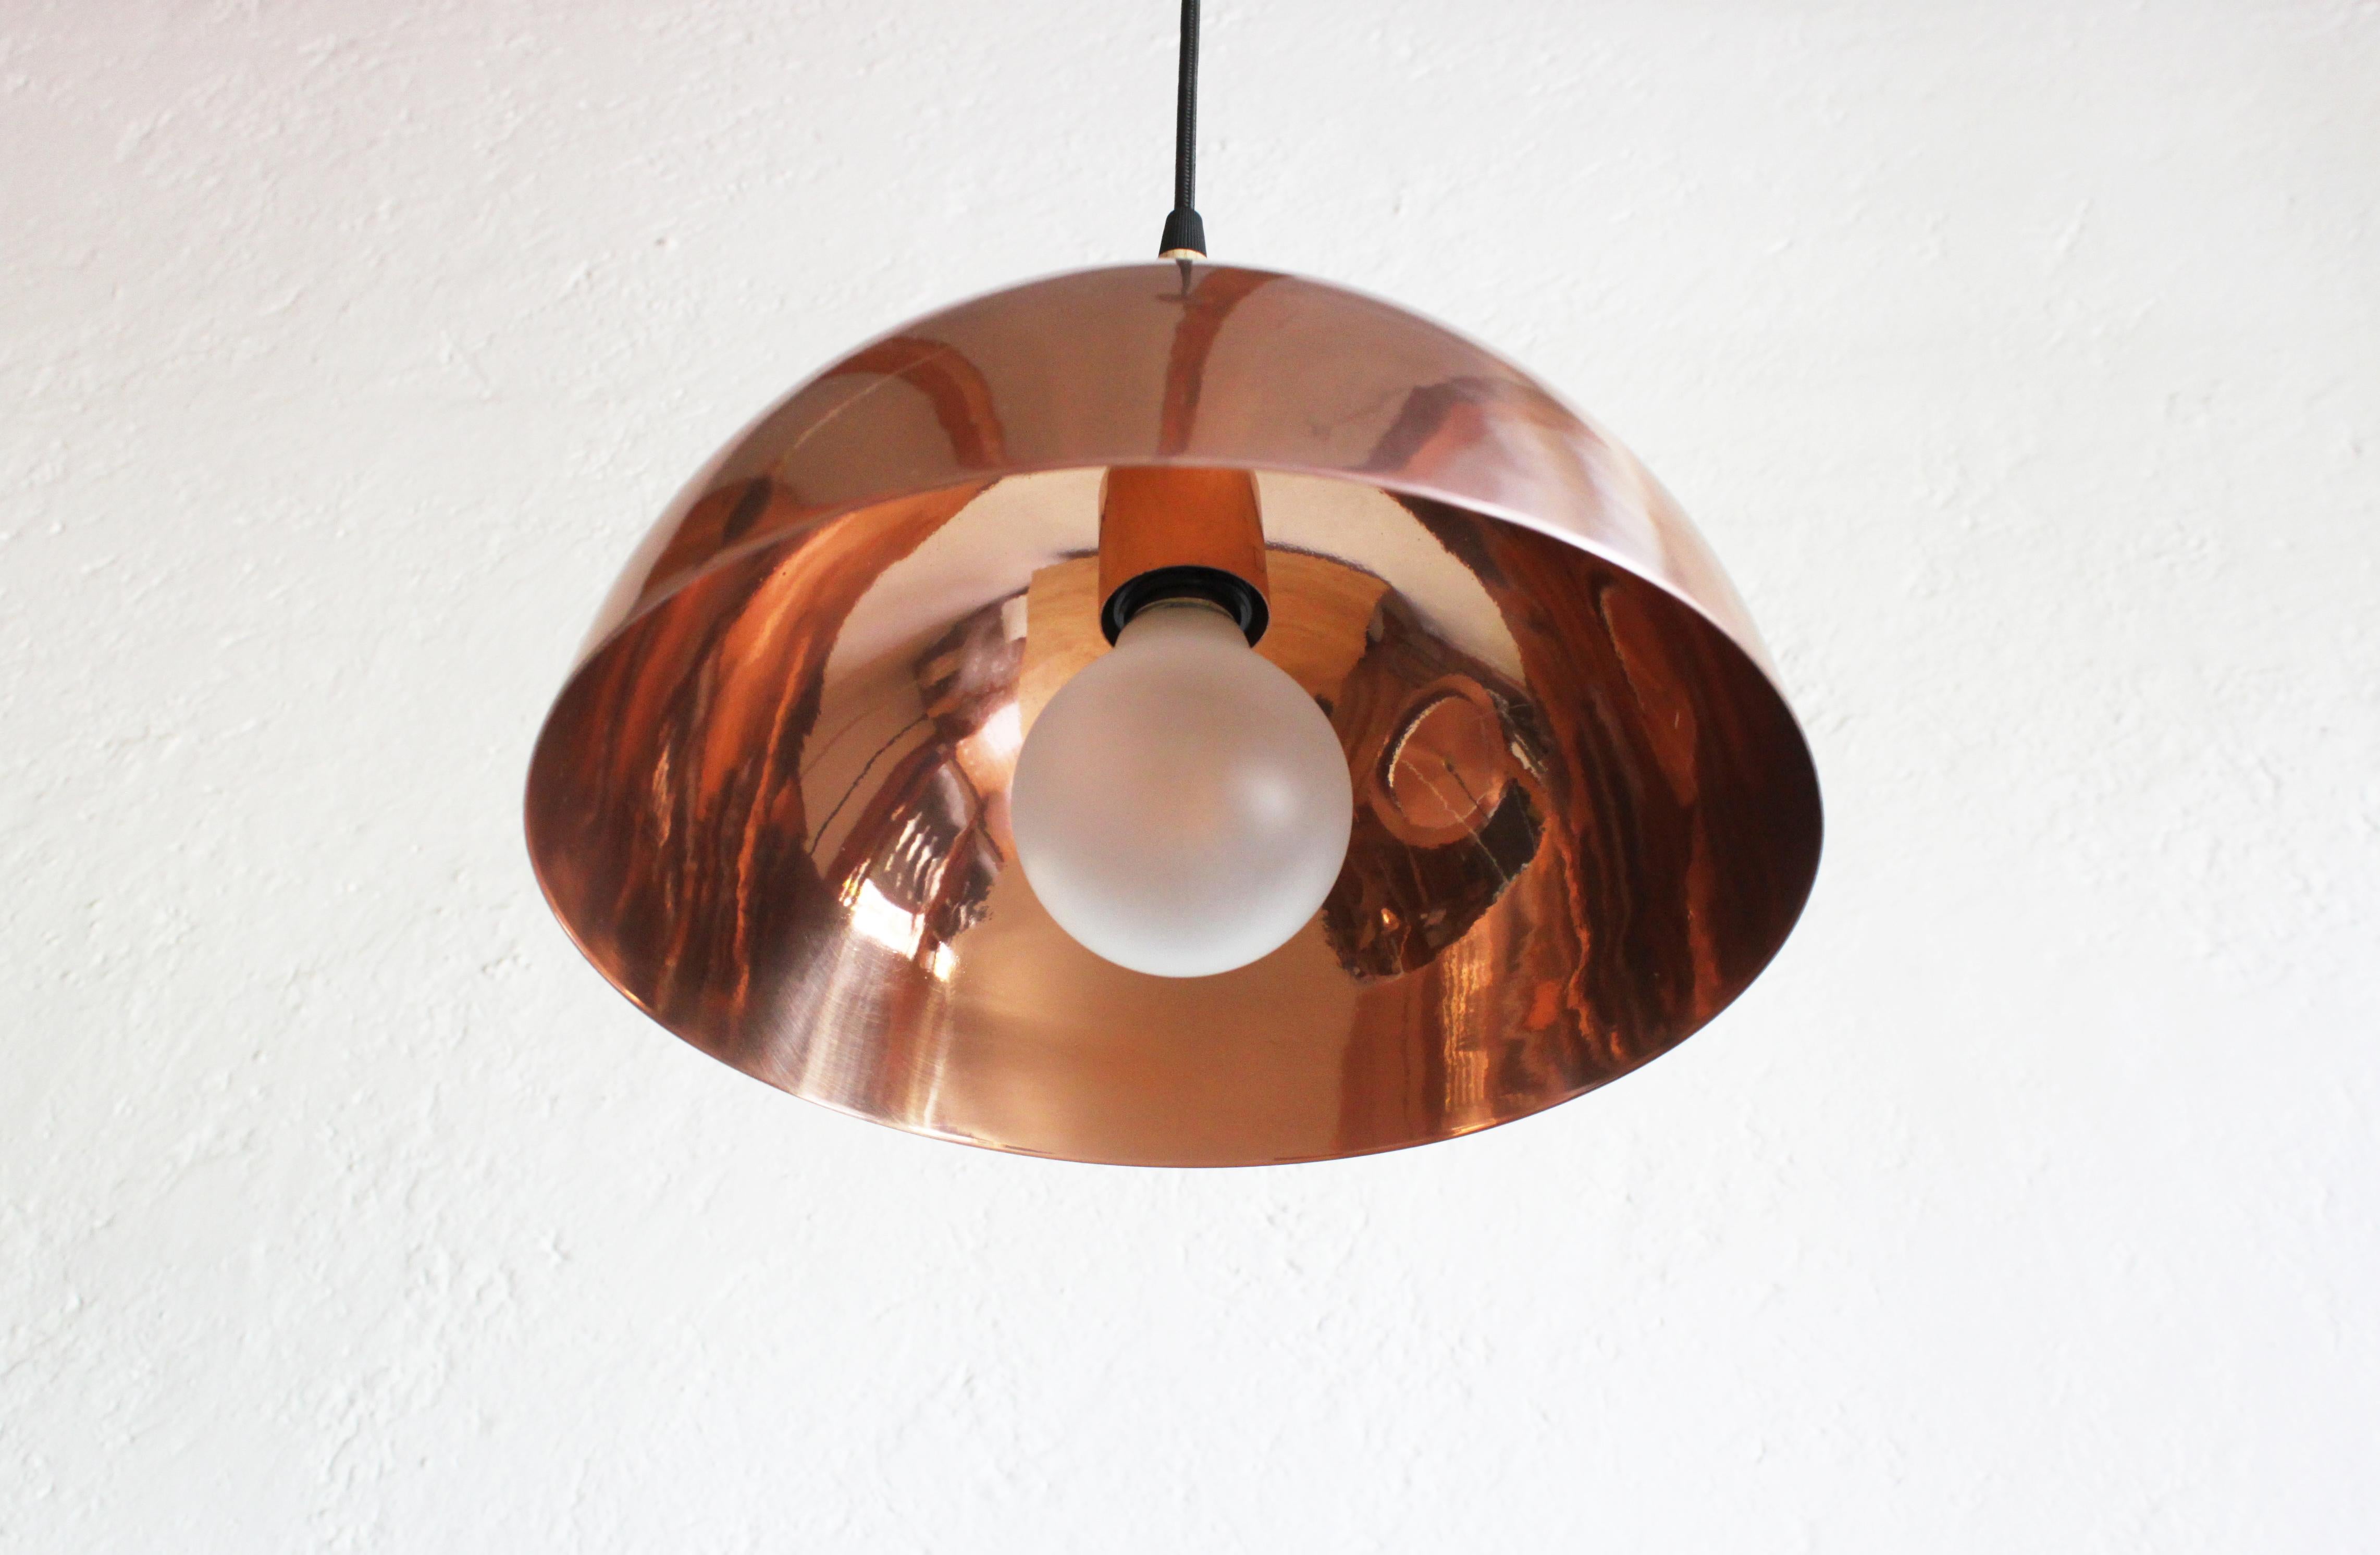 Contemporary Domo Abajo 60 Pendant Lamp, Maria Beckmann, Represented by Tuleste Factory For Sale